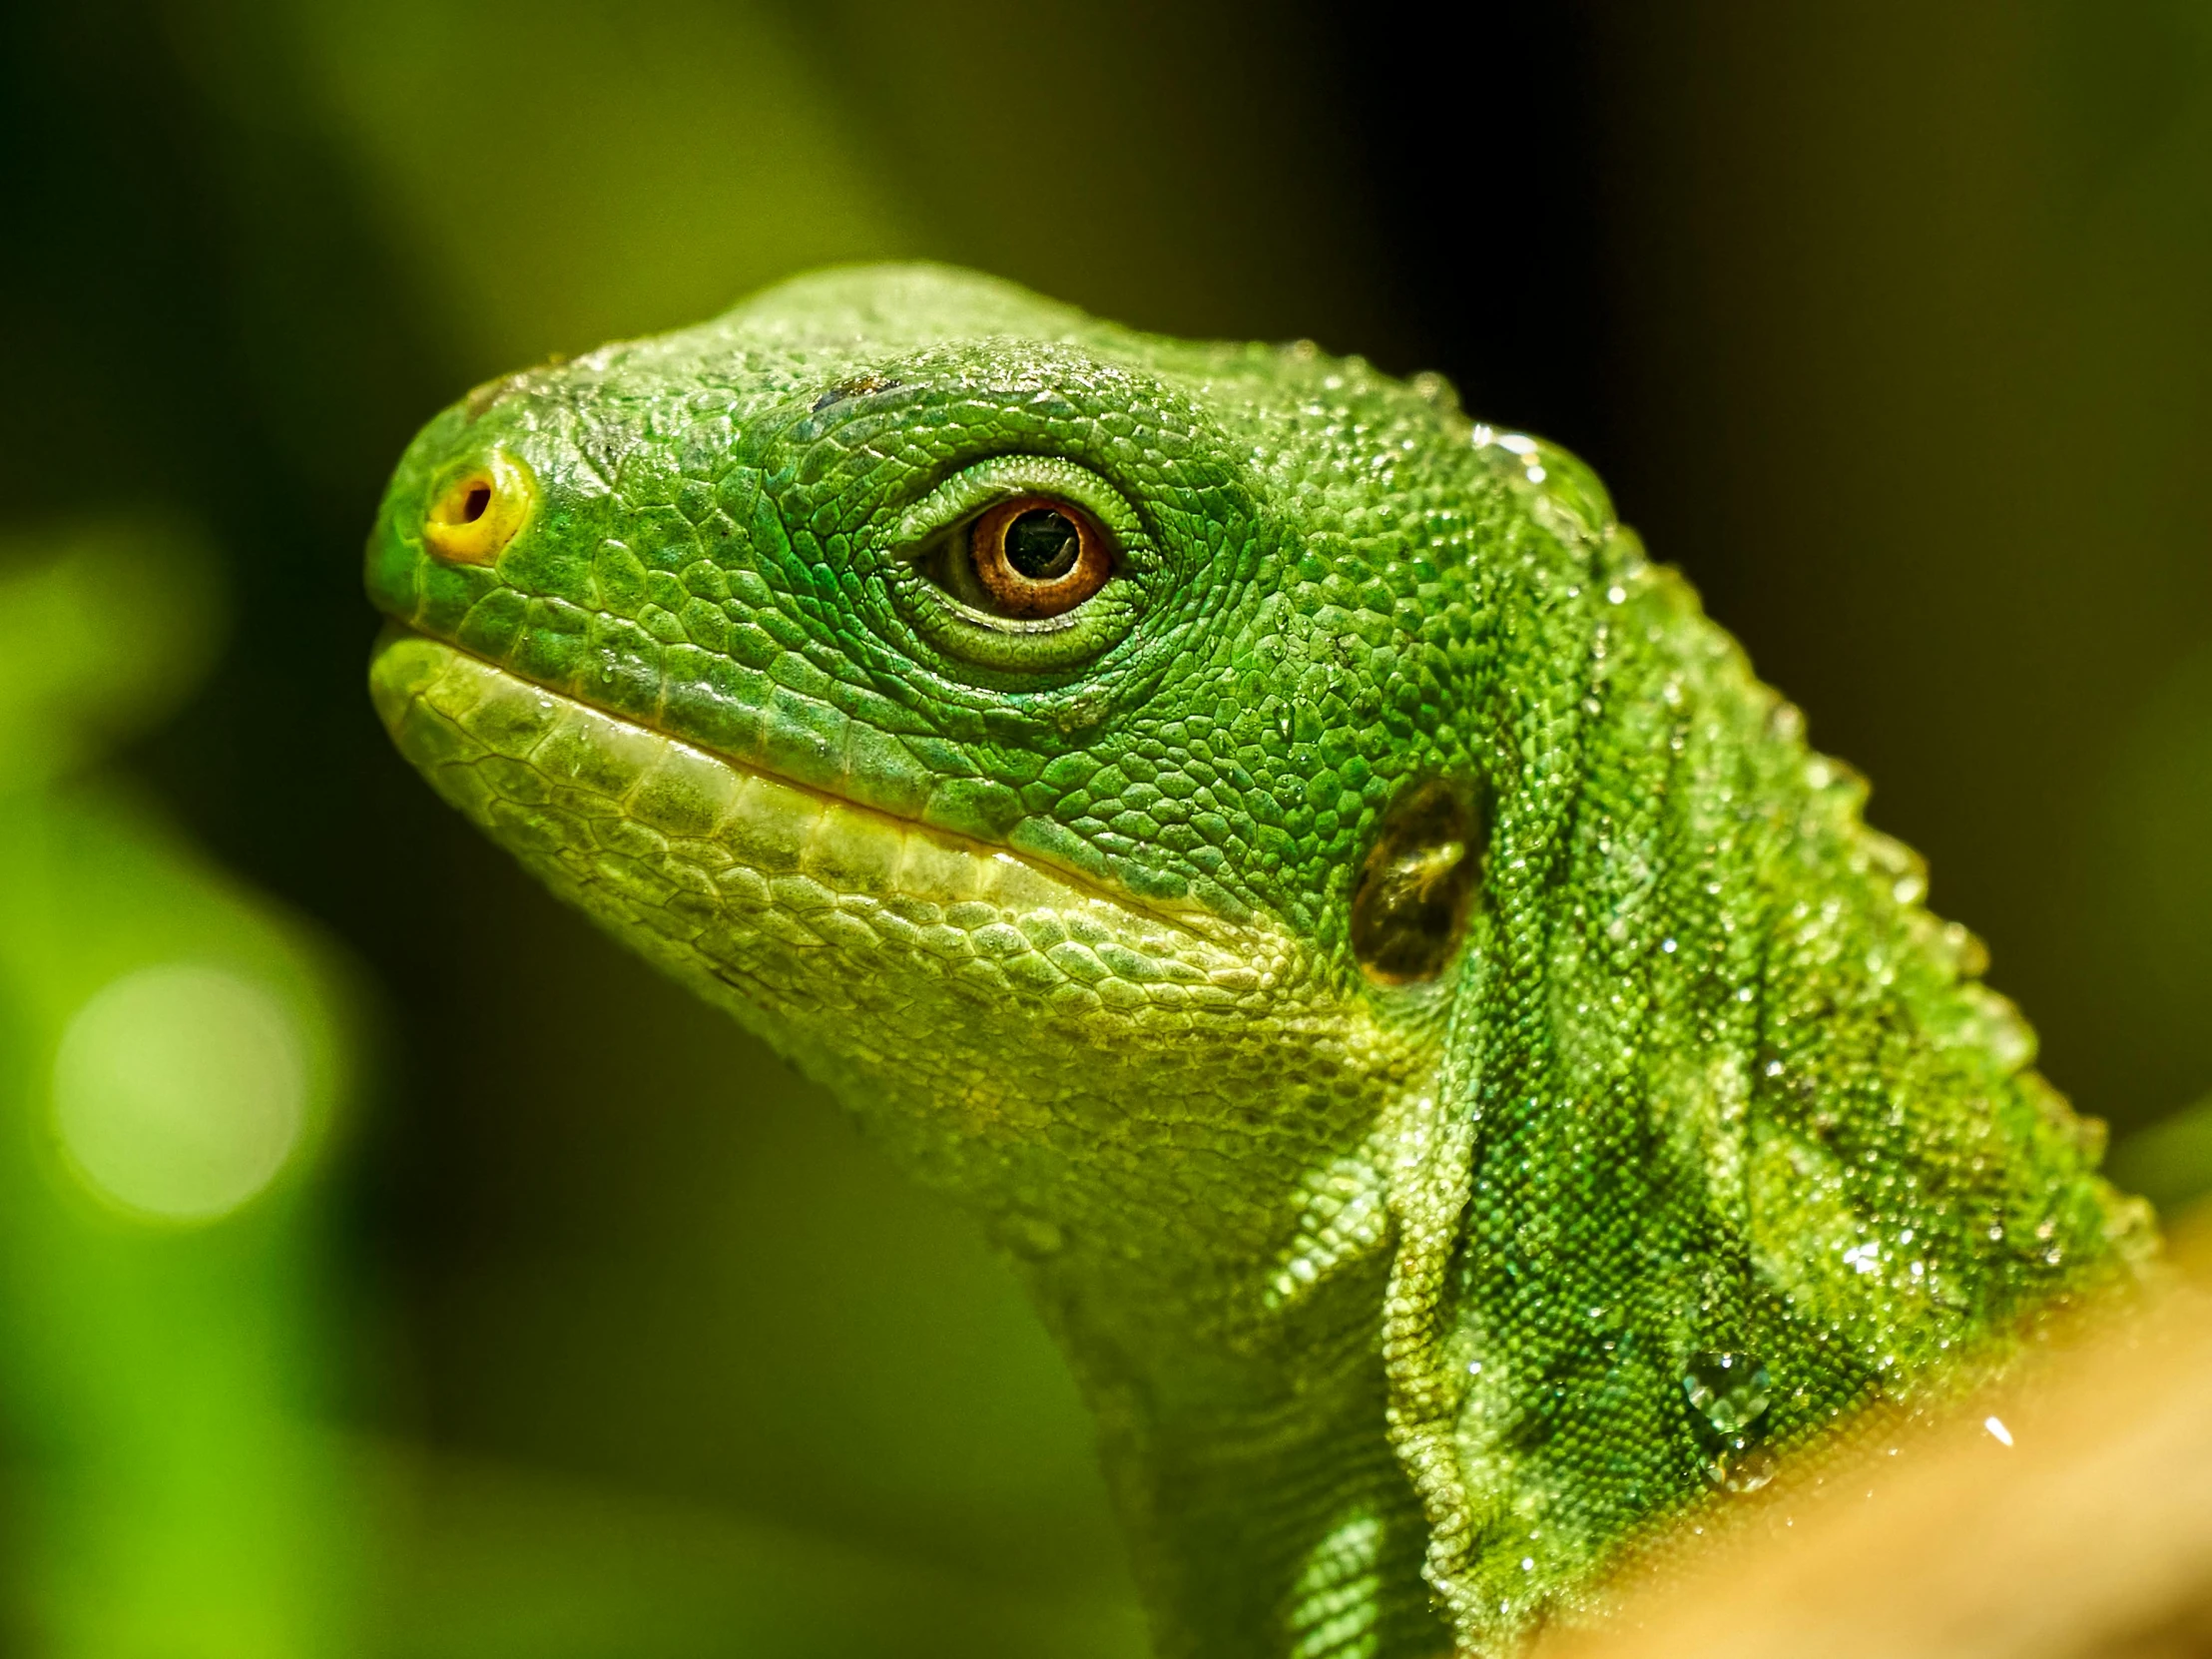 a green lizard is looking at the camera